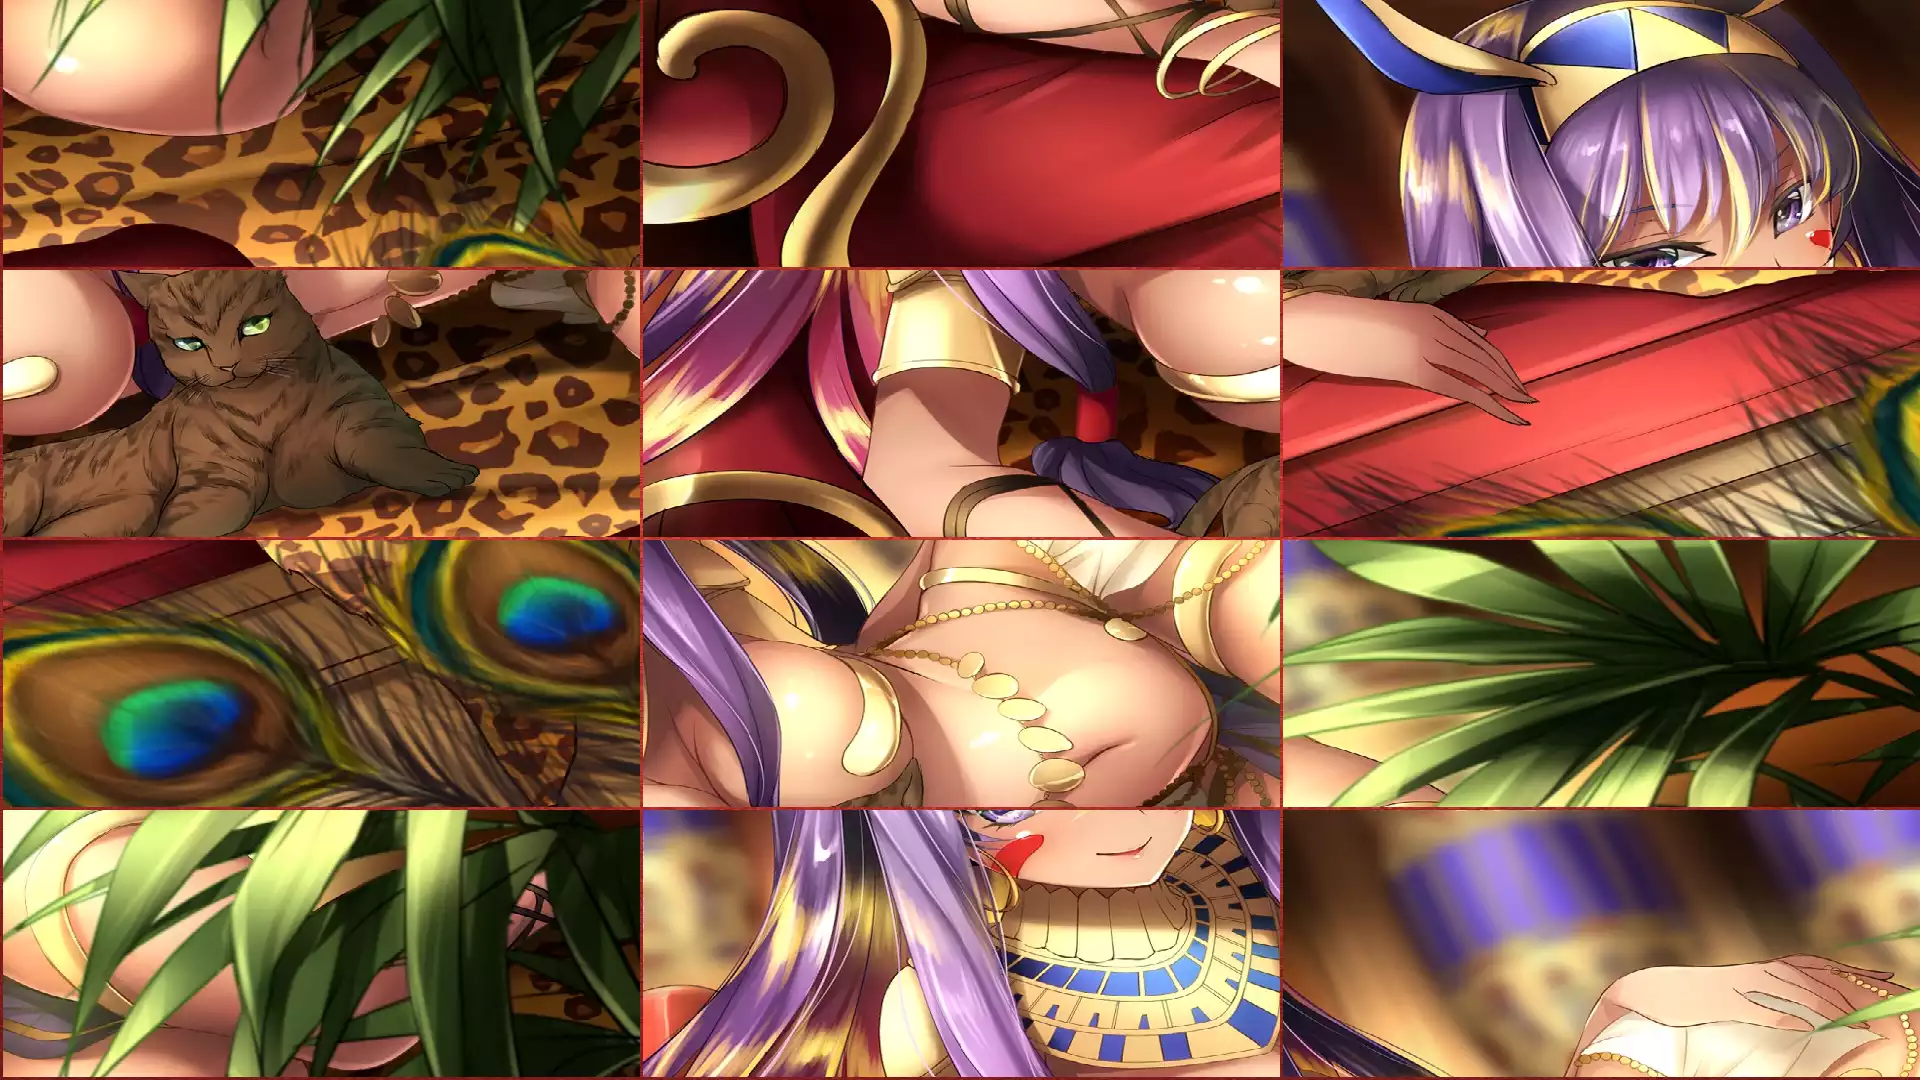 Hot Cats Puzzle pic,wallpaper,puzzle,app,hentia,pictures,android,time,games,apps,daily,watching,erotic,gallerie,pics,hentai,sexy,search,porn,futanari,pornstar,punishment,titties,galleries